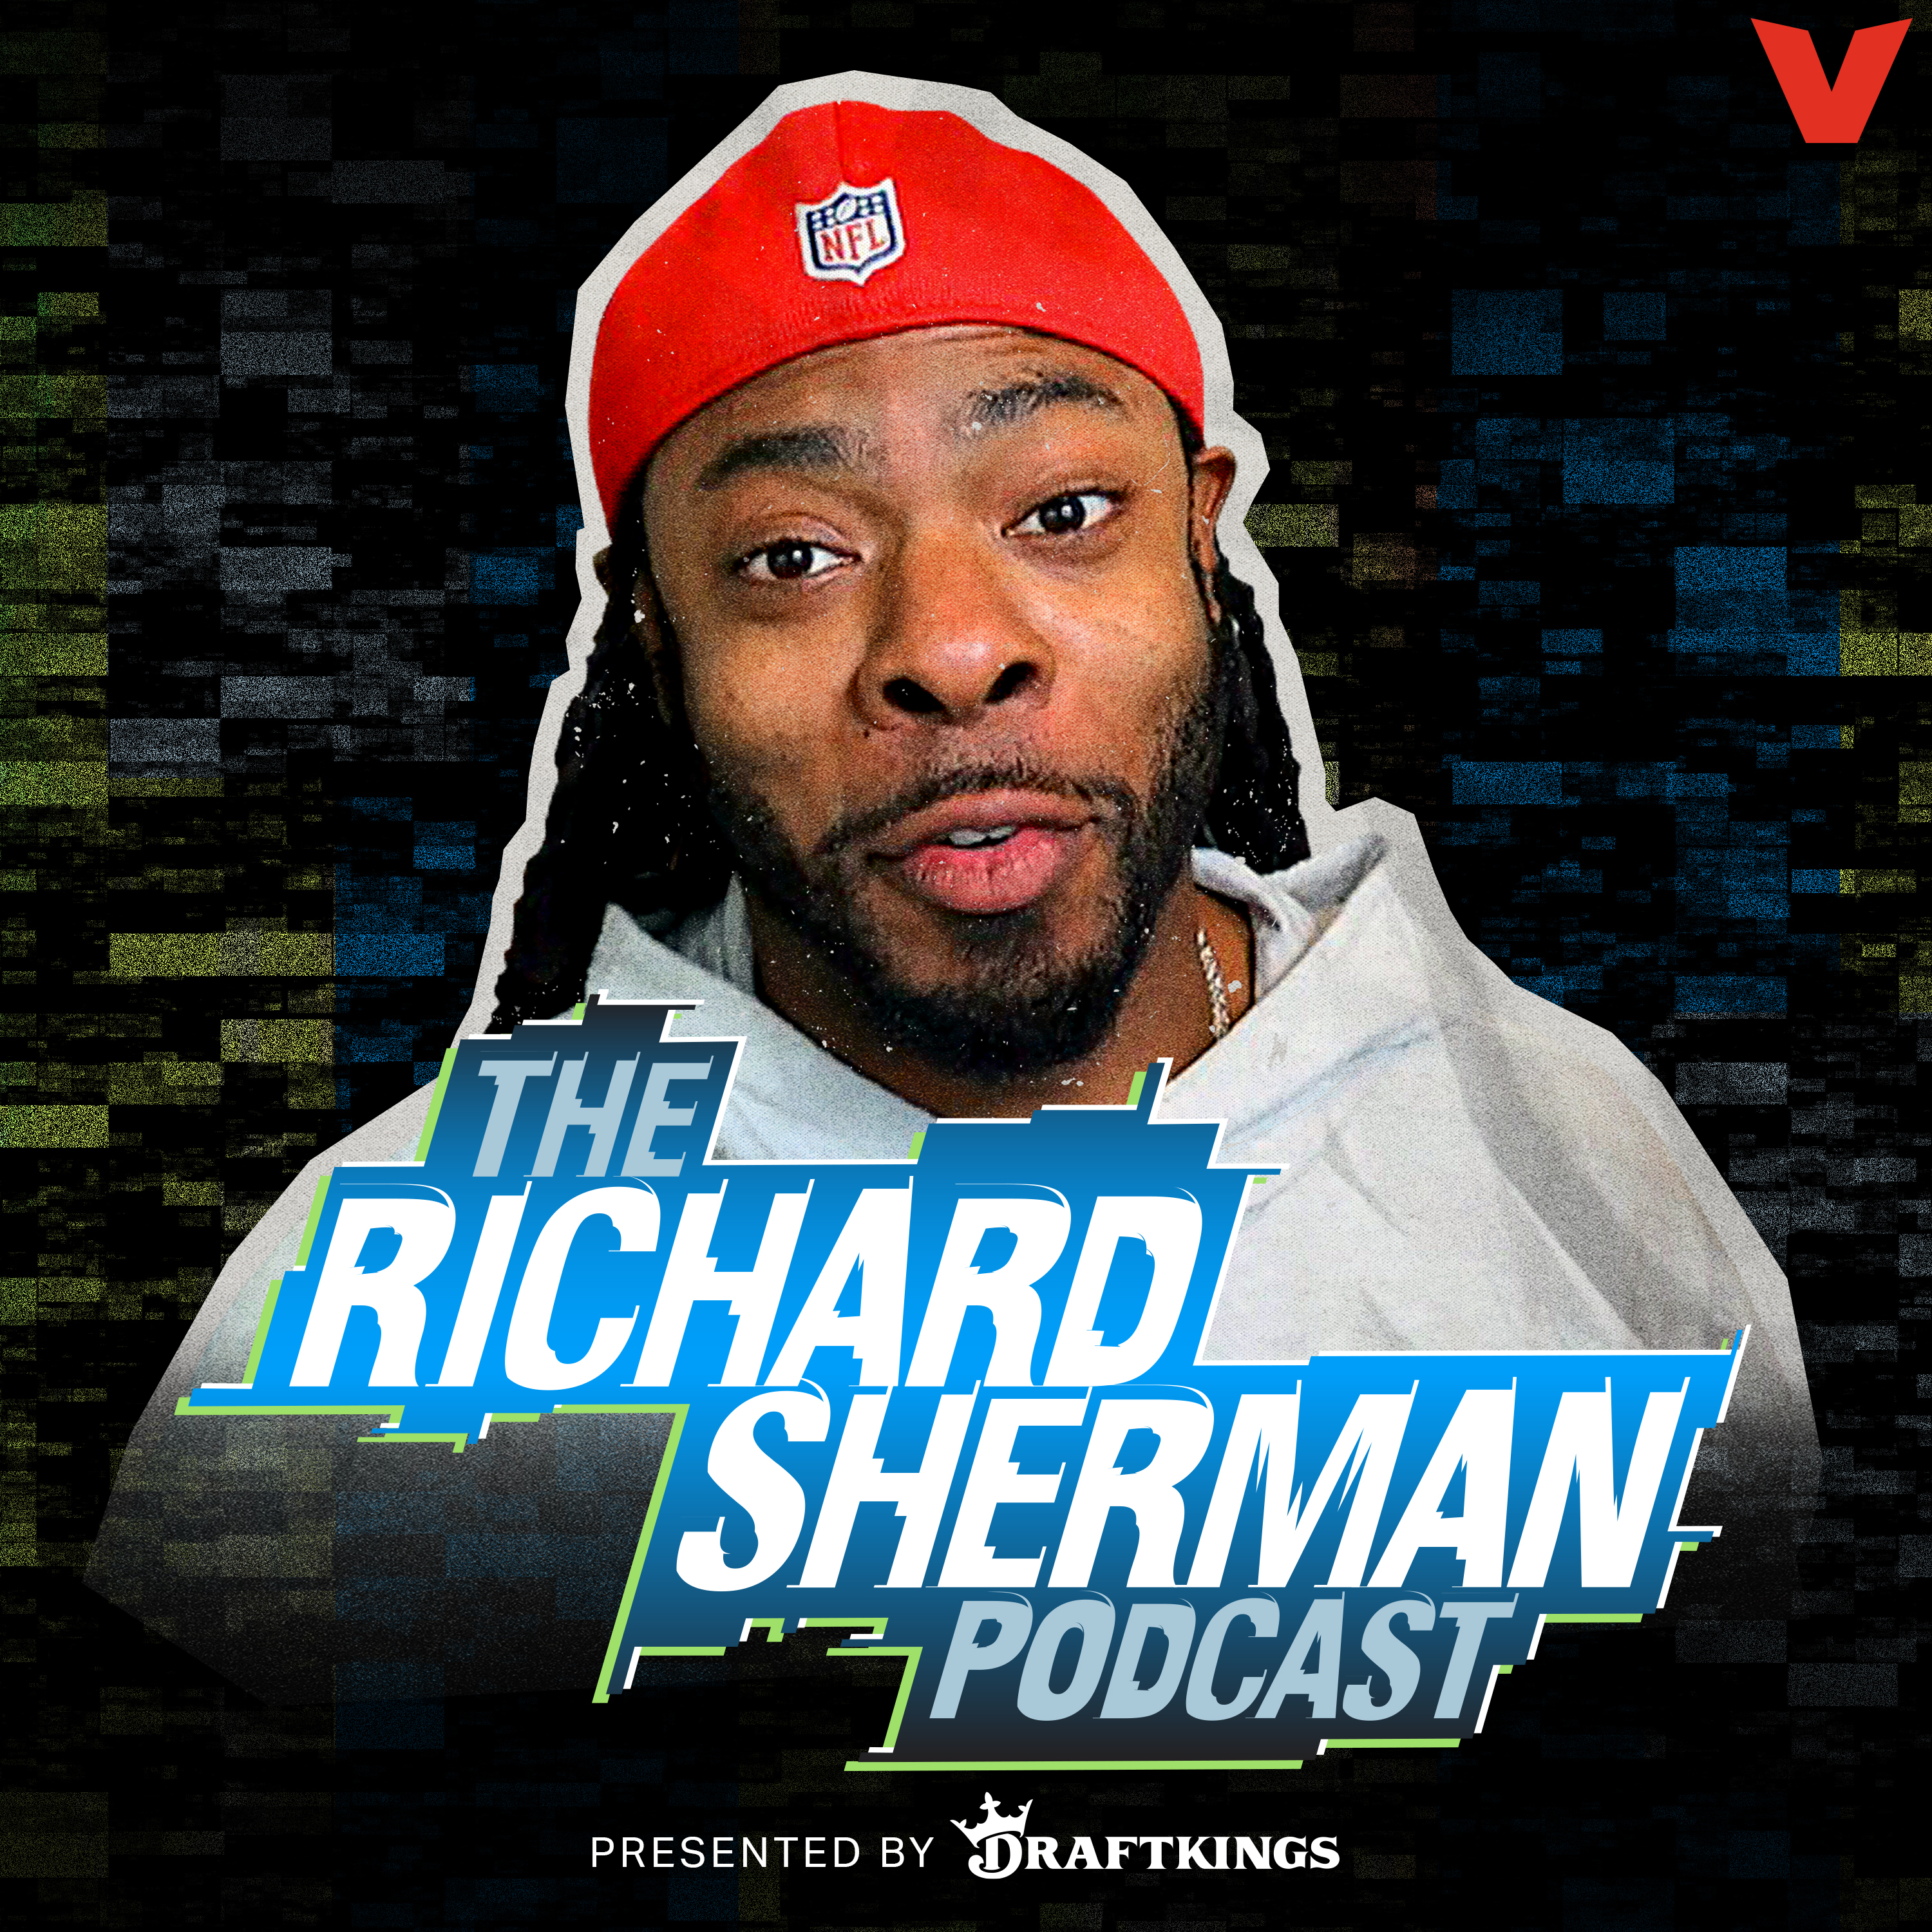 The Richard Sherman Podcast - NFL free agency reaction: Russell Wilson to Steelers, Kirk Cousins to Falcons, 49ers quiet